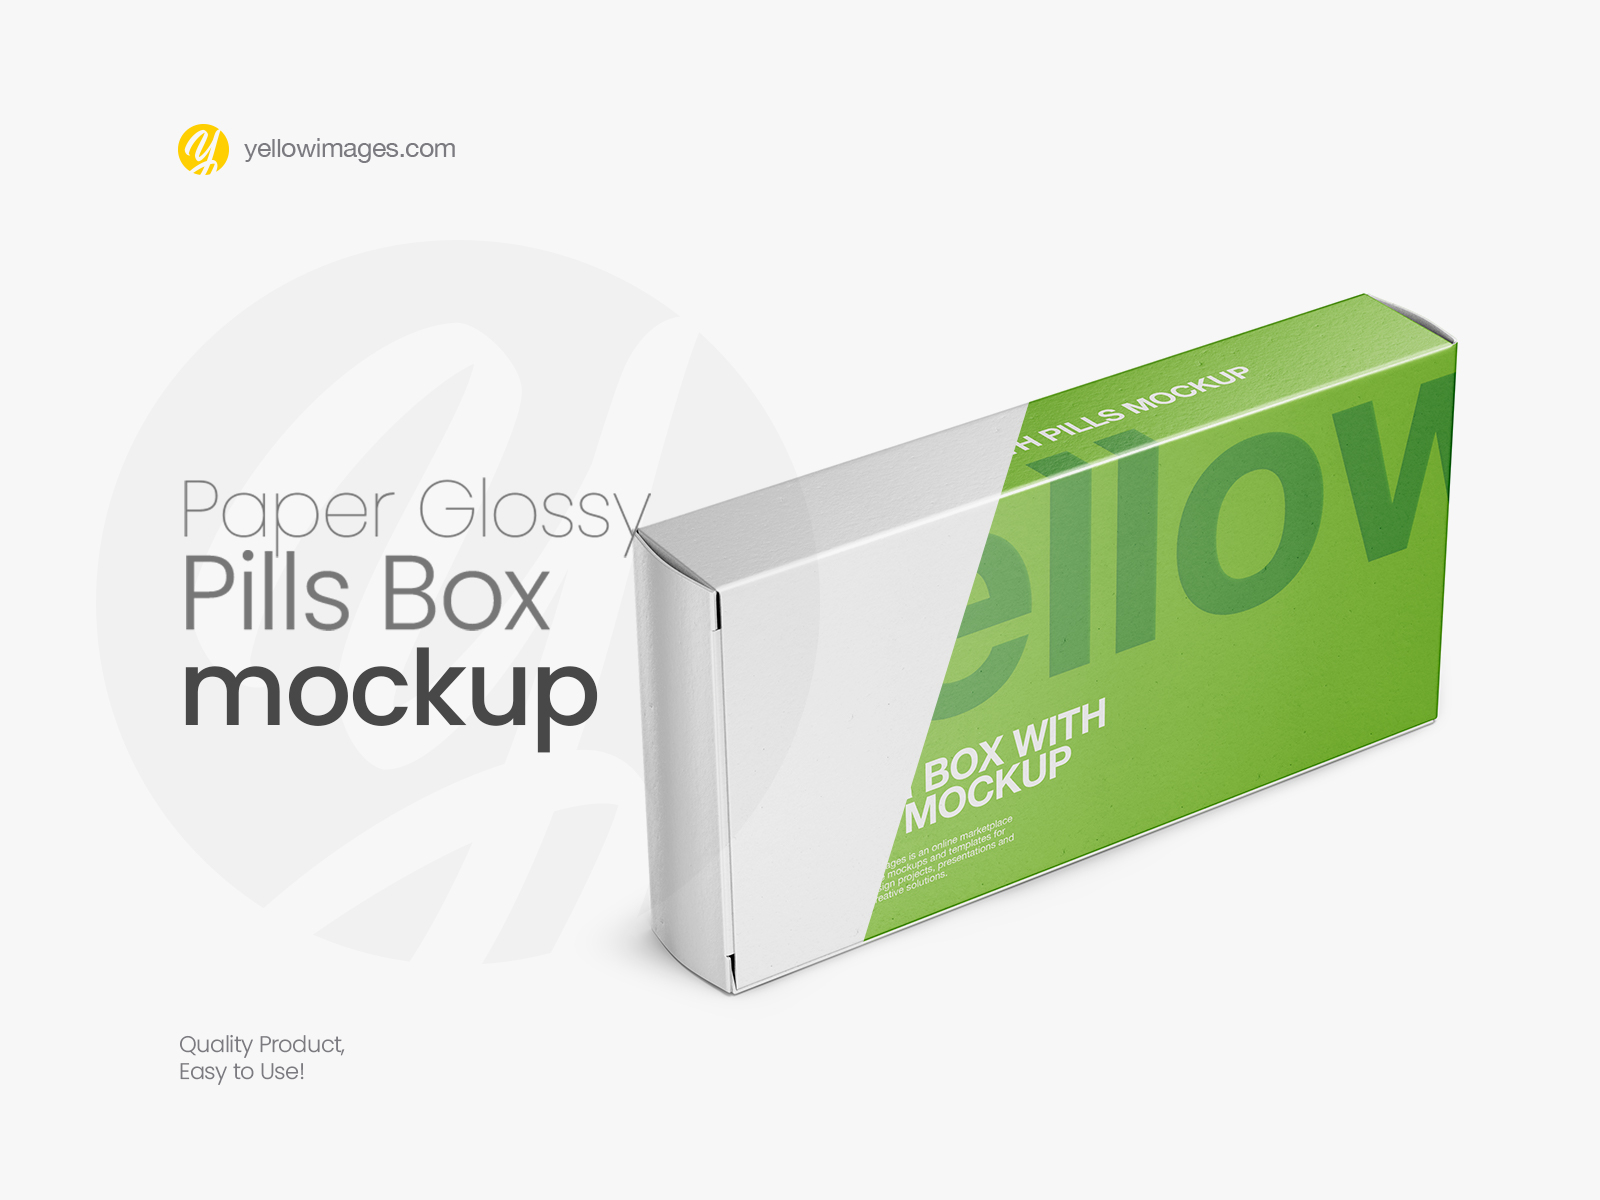 Download Free 3d Mockup Free Download Psd Download Free And Premium Psd Mockup Templates And Design Assets PSD Mockups.